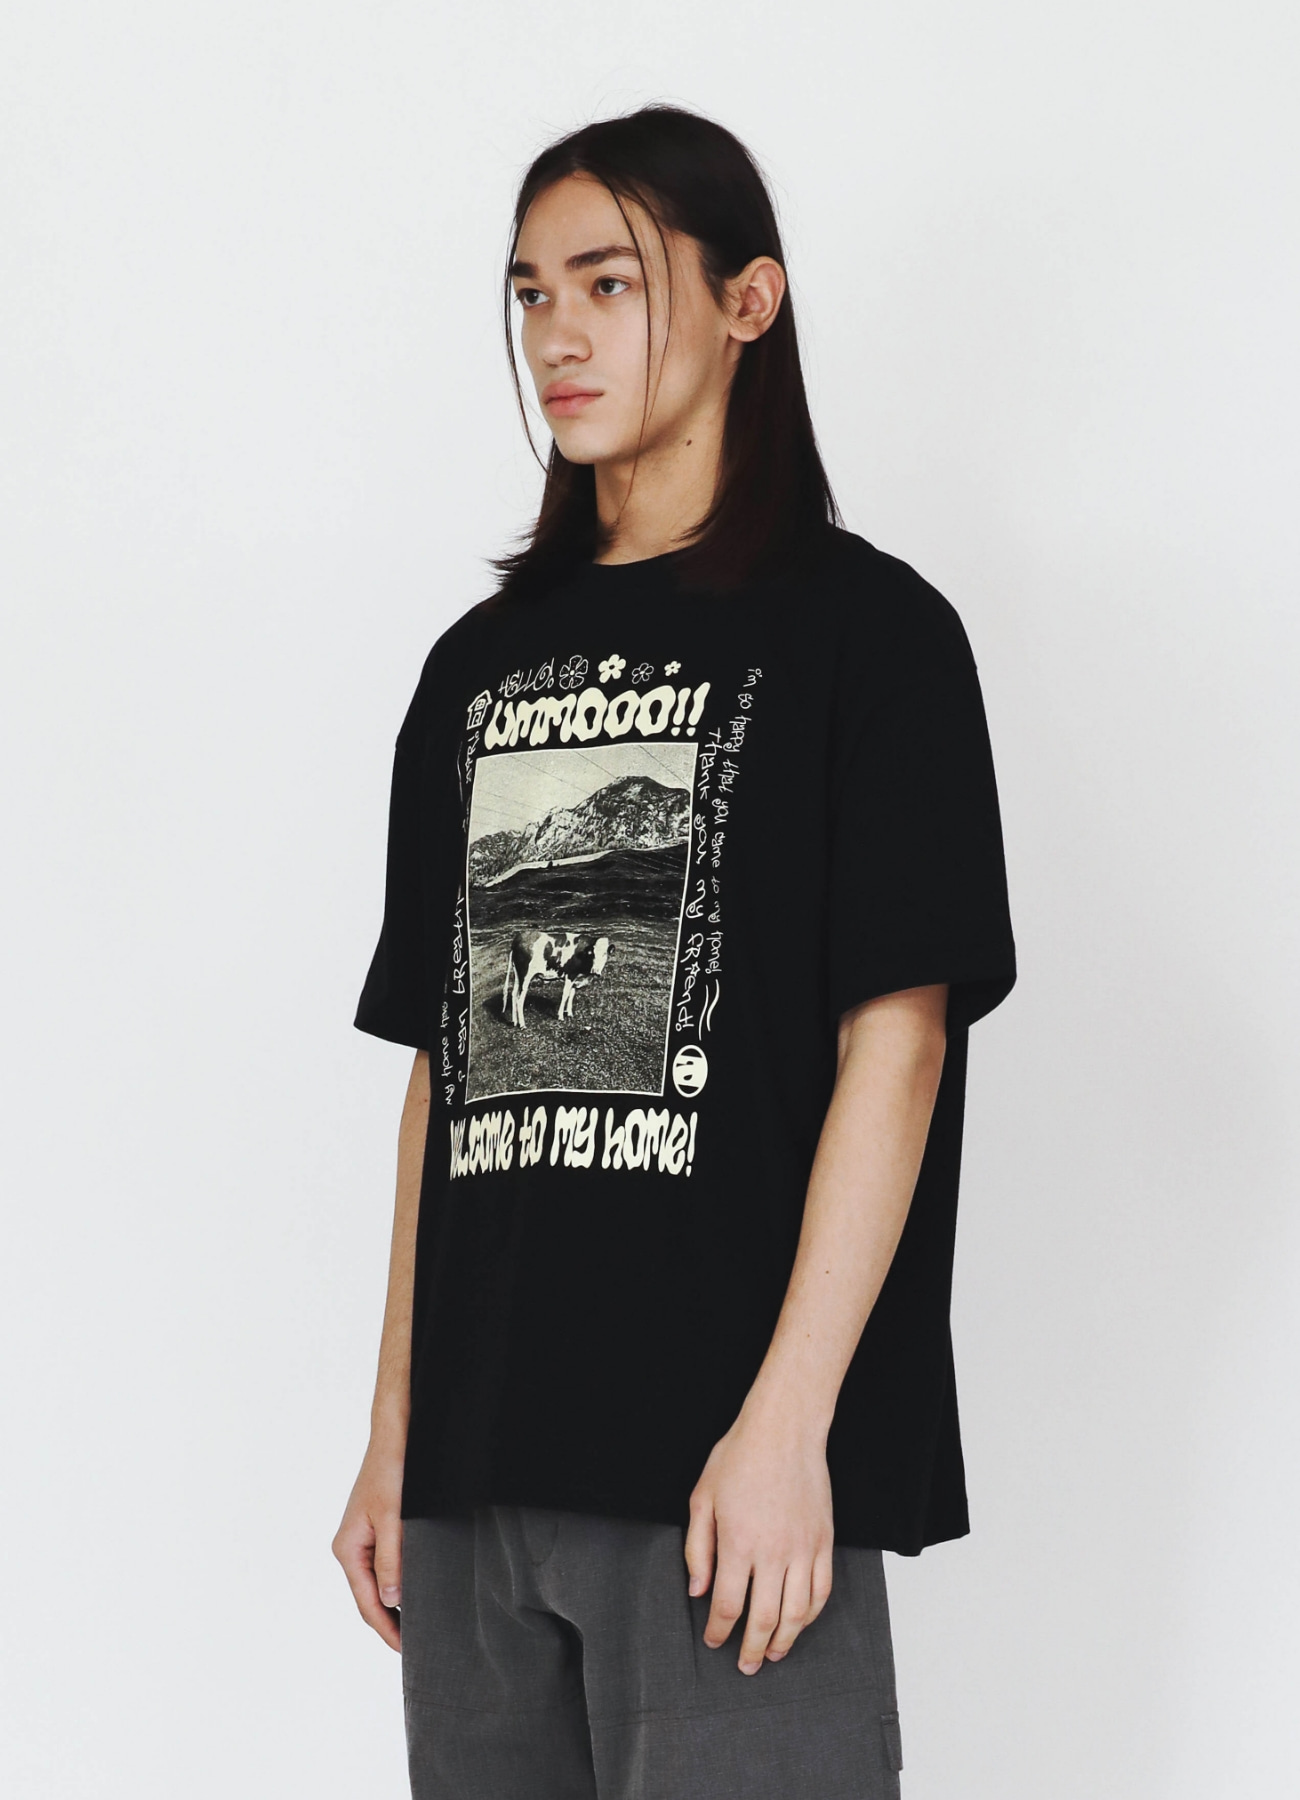 WELCOME HOME T-SHIRT BLACK